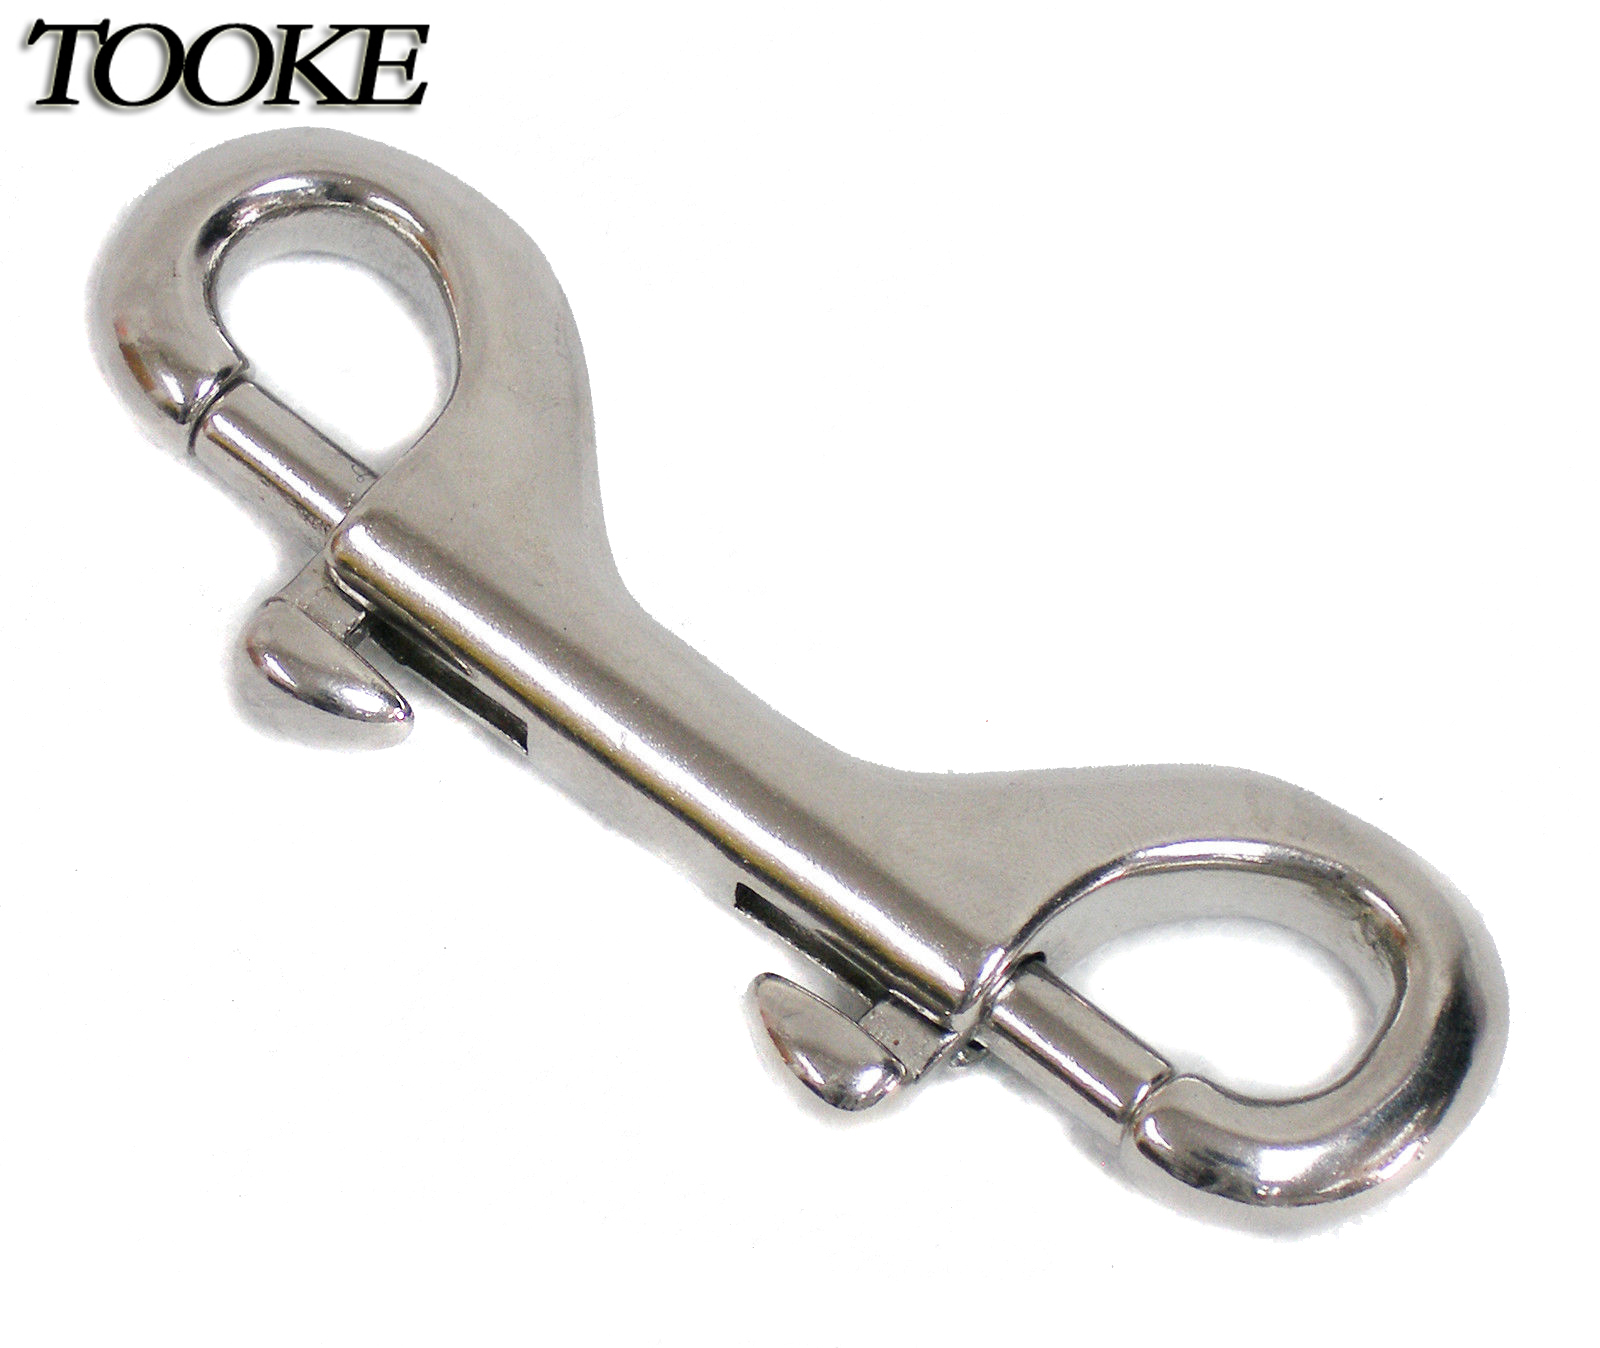 TOOKE Scuba Diving 4 316 Stainless Steel Double Ended Bolt Snap Buckle Metal Clip